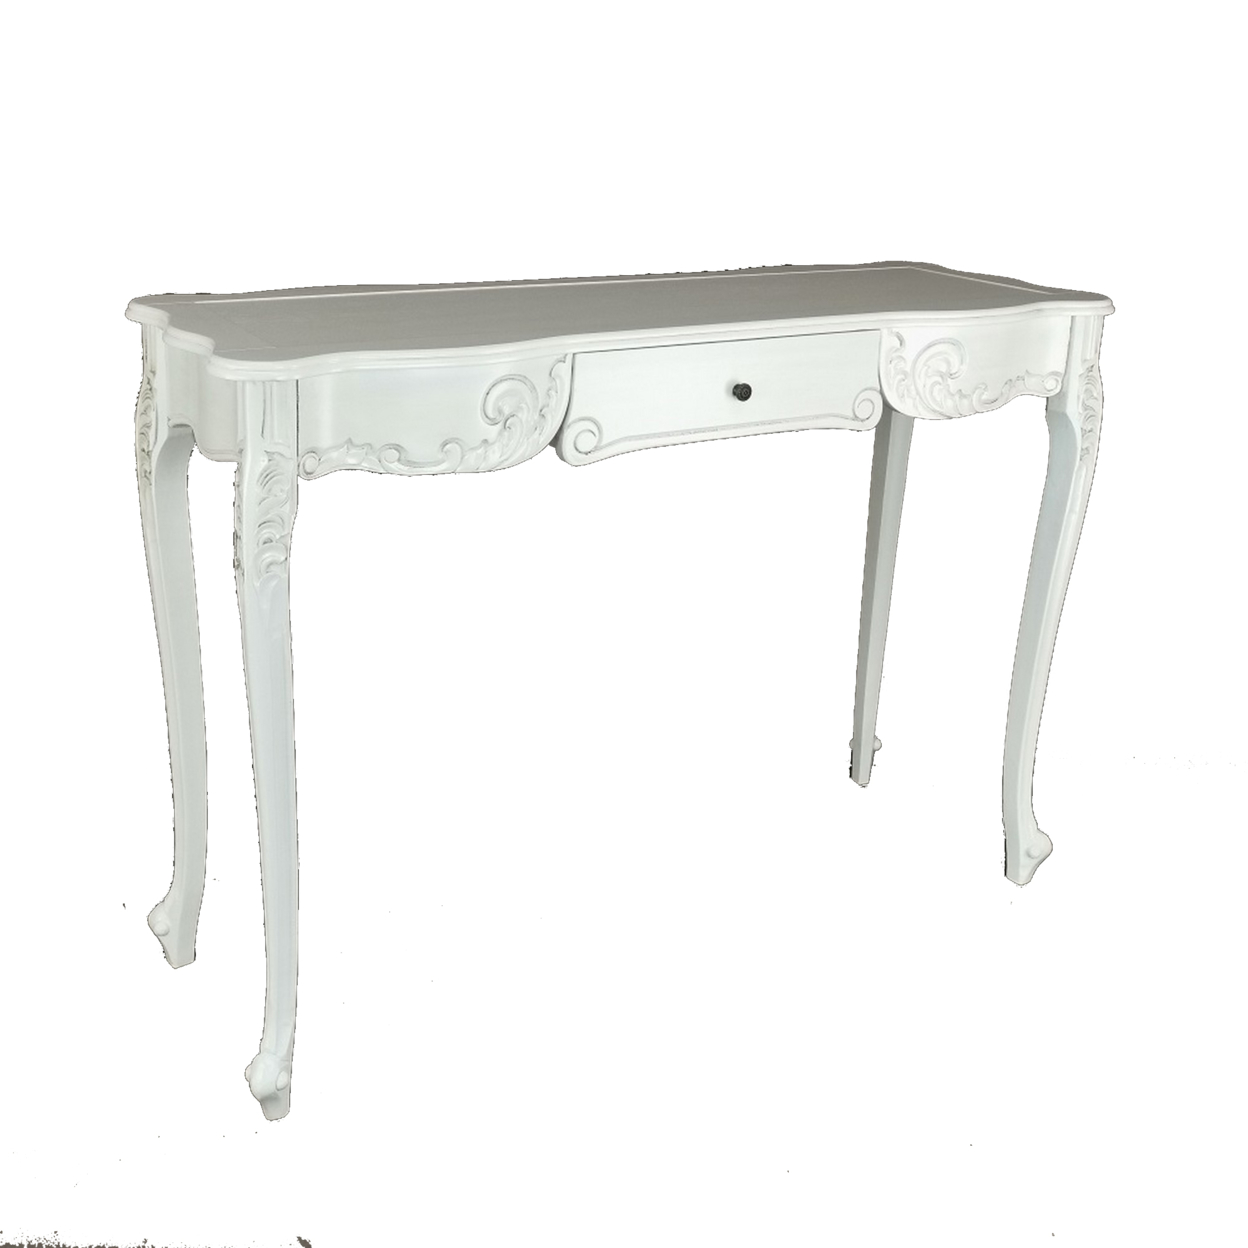 Troy 32 Inch Classic Wood Console Table, 1 Drawer, Floral Cared, White- Saltoro Sherpi- Saltoro Sherpi